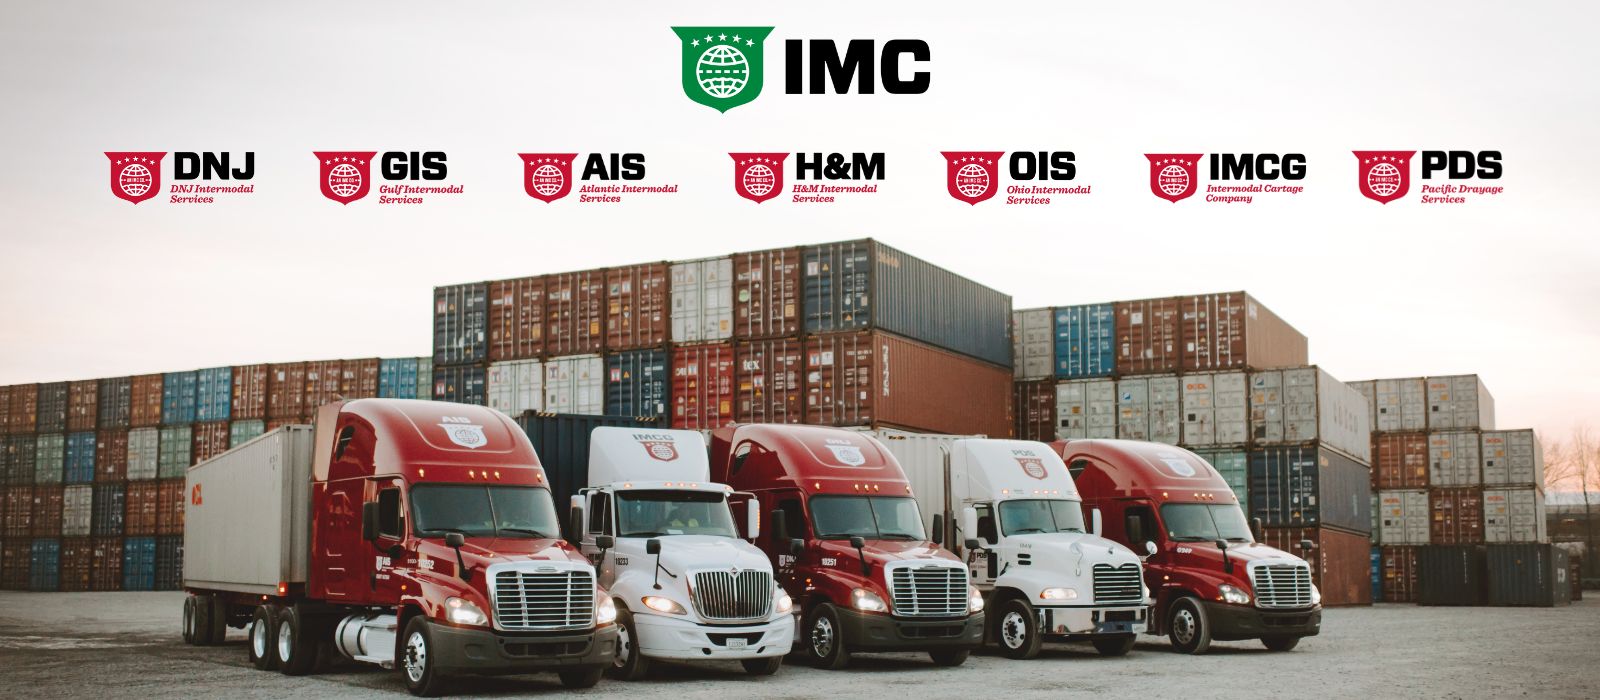 IMC is named the 43rd largest ‘For-Hire’ carriers in North America